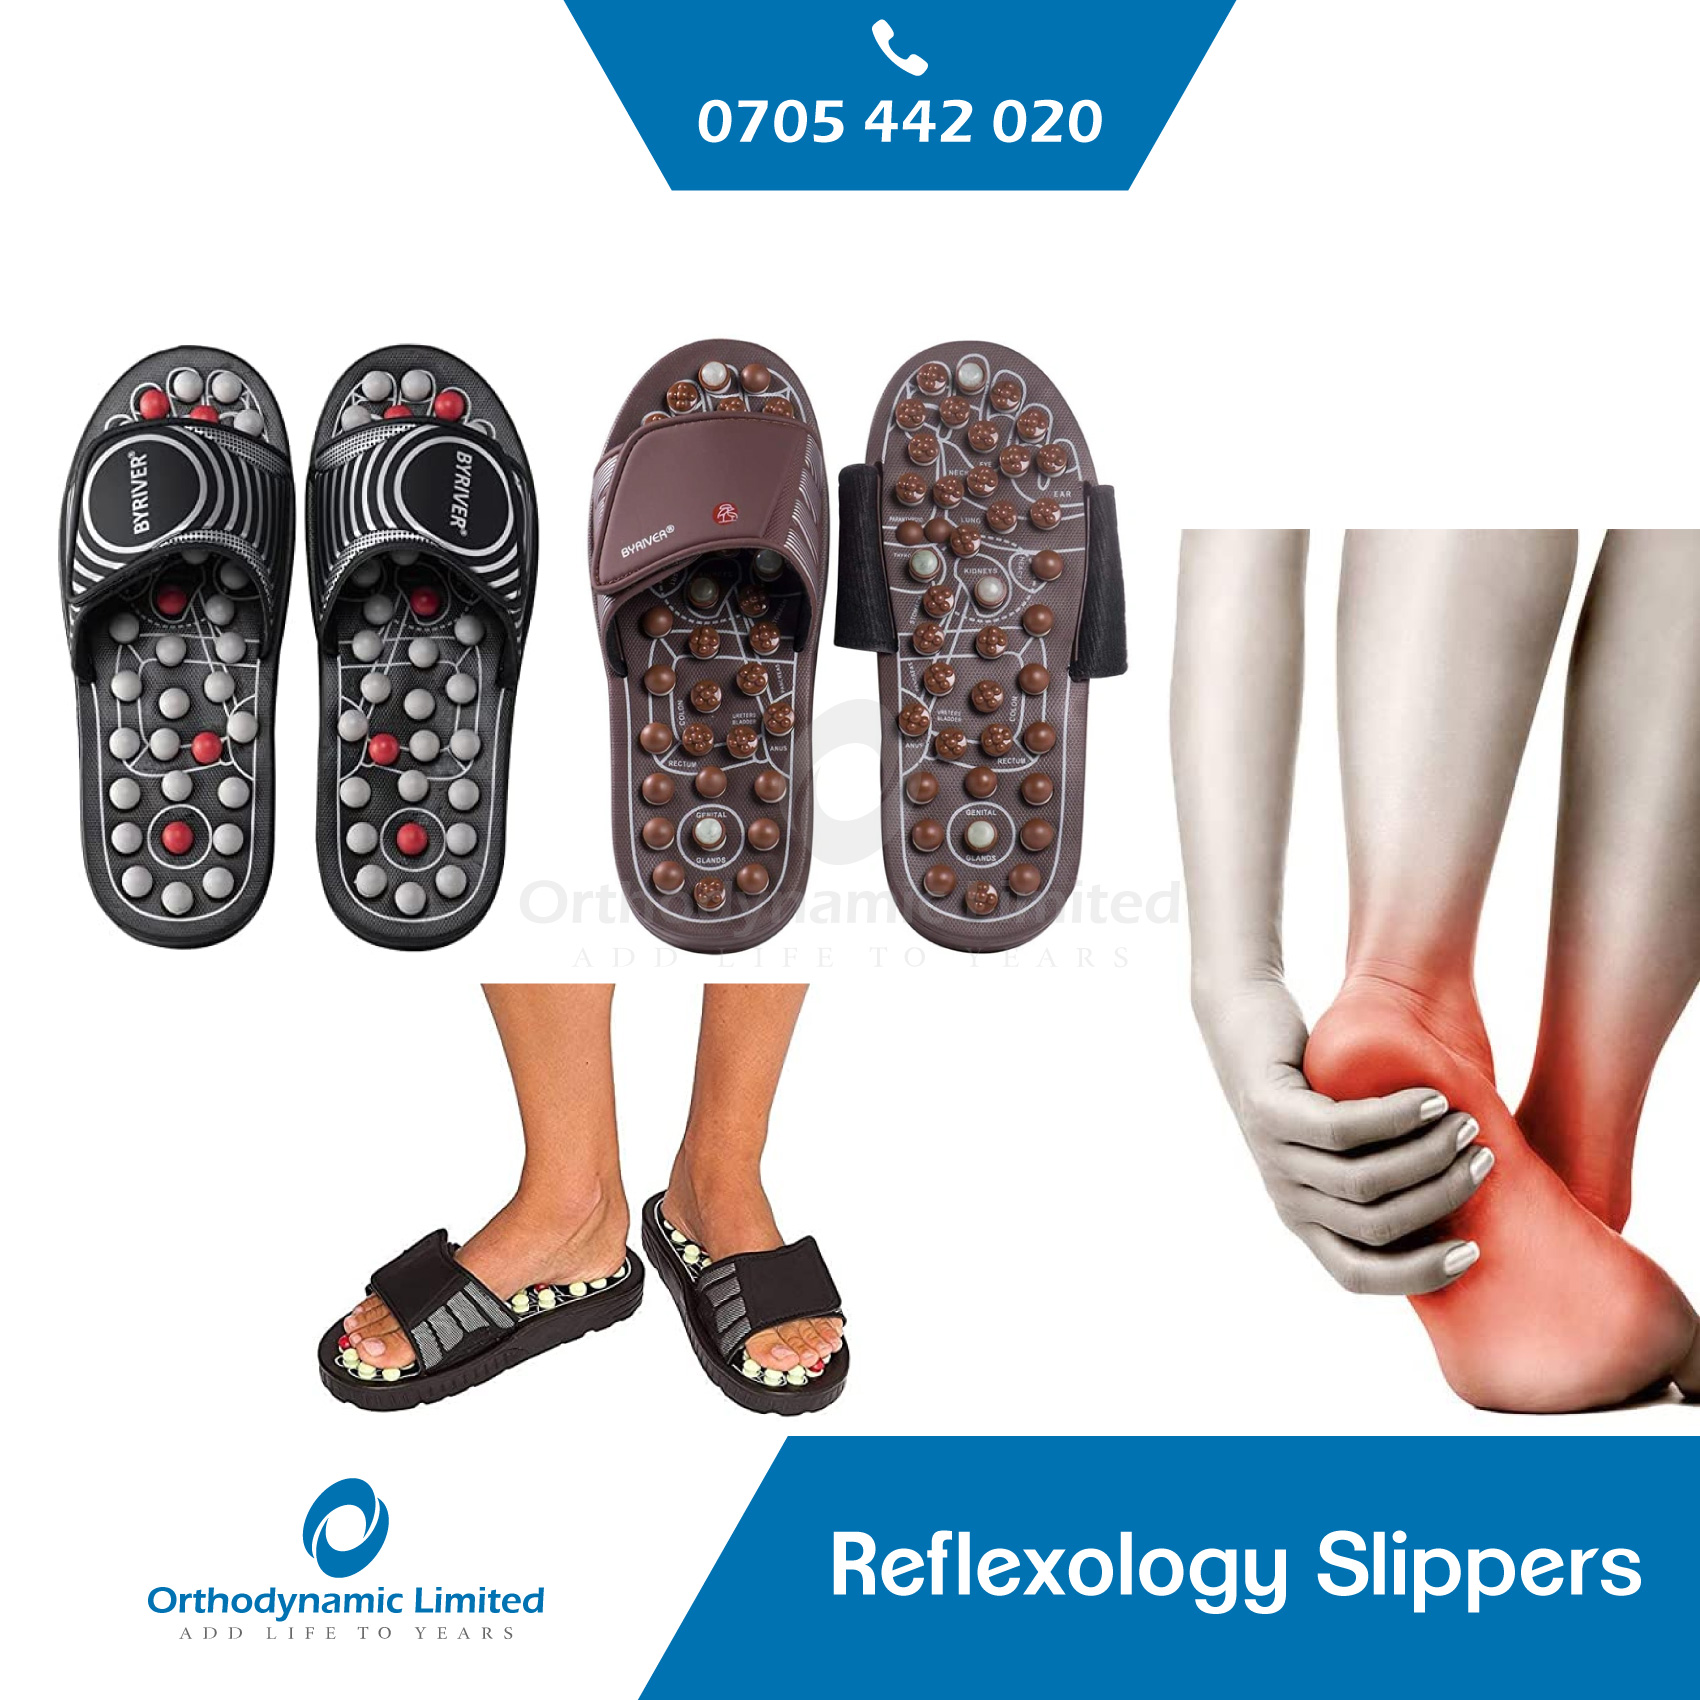 Acupressure Slippers/Reflexology Sandals/Therapeutic Acupoint Massager/ Acupressure Acupuncture Therapy Medical/Yoga Paduka/Accu Paduka/Health Care  Slippers/Foot Care Relaxation/Rotating Acupressure at Rs 556 | Chennai| ID:  26132607030